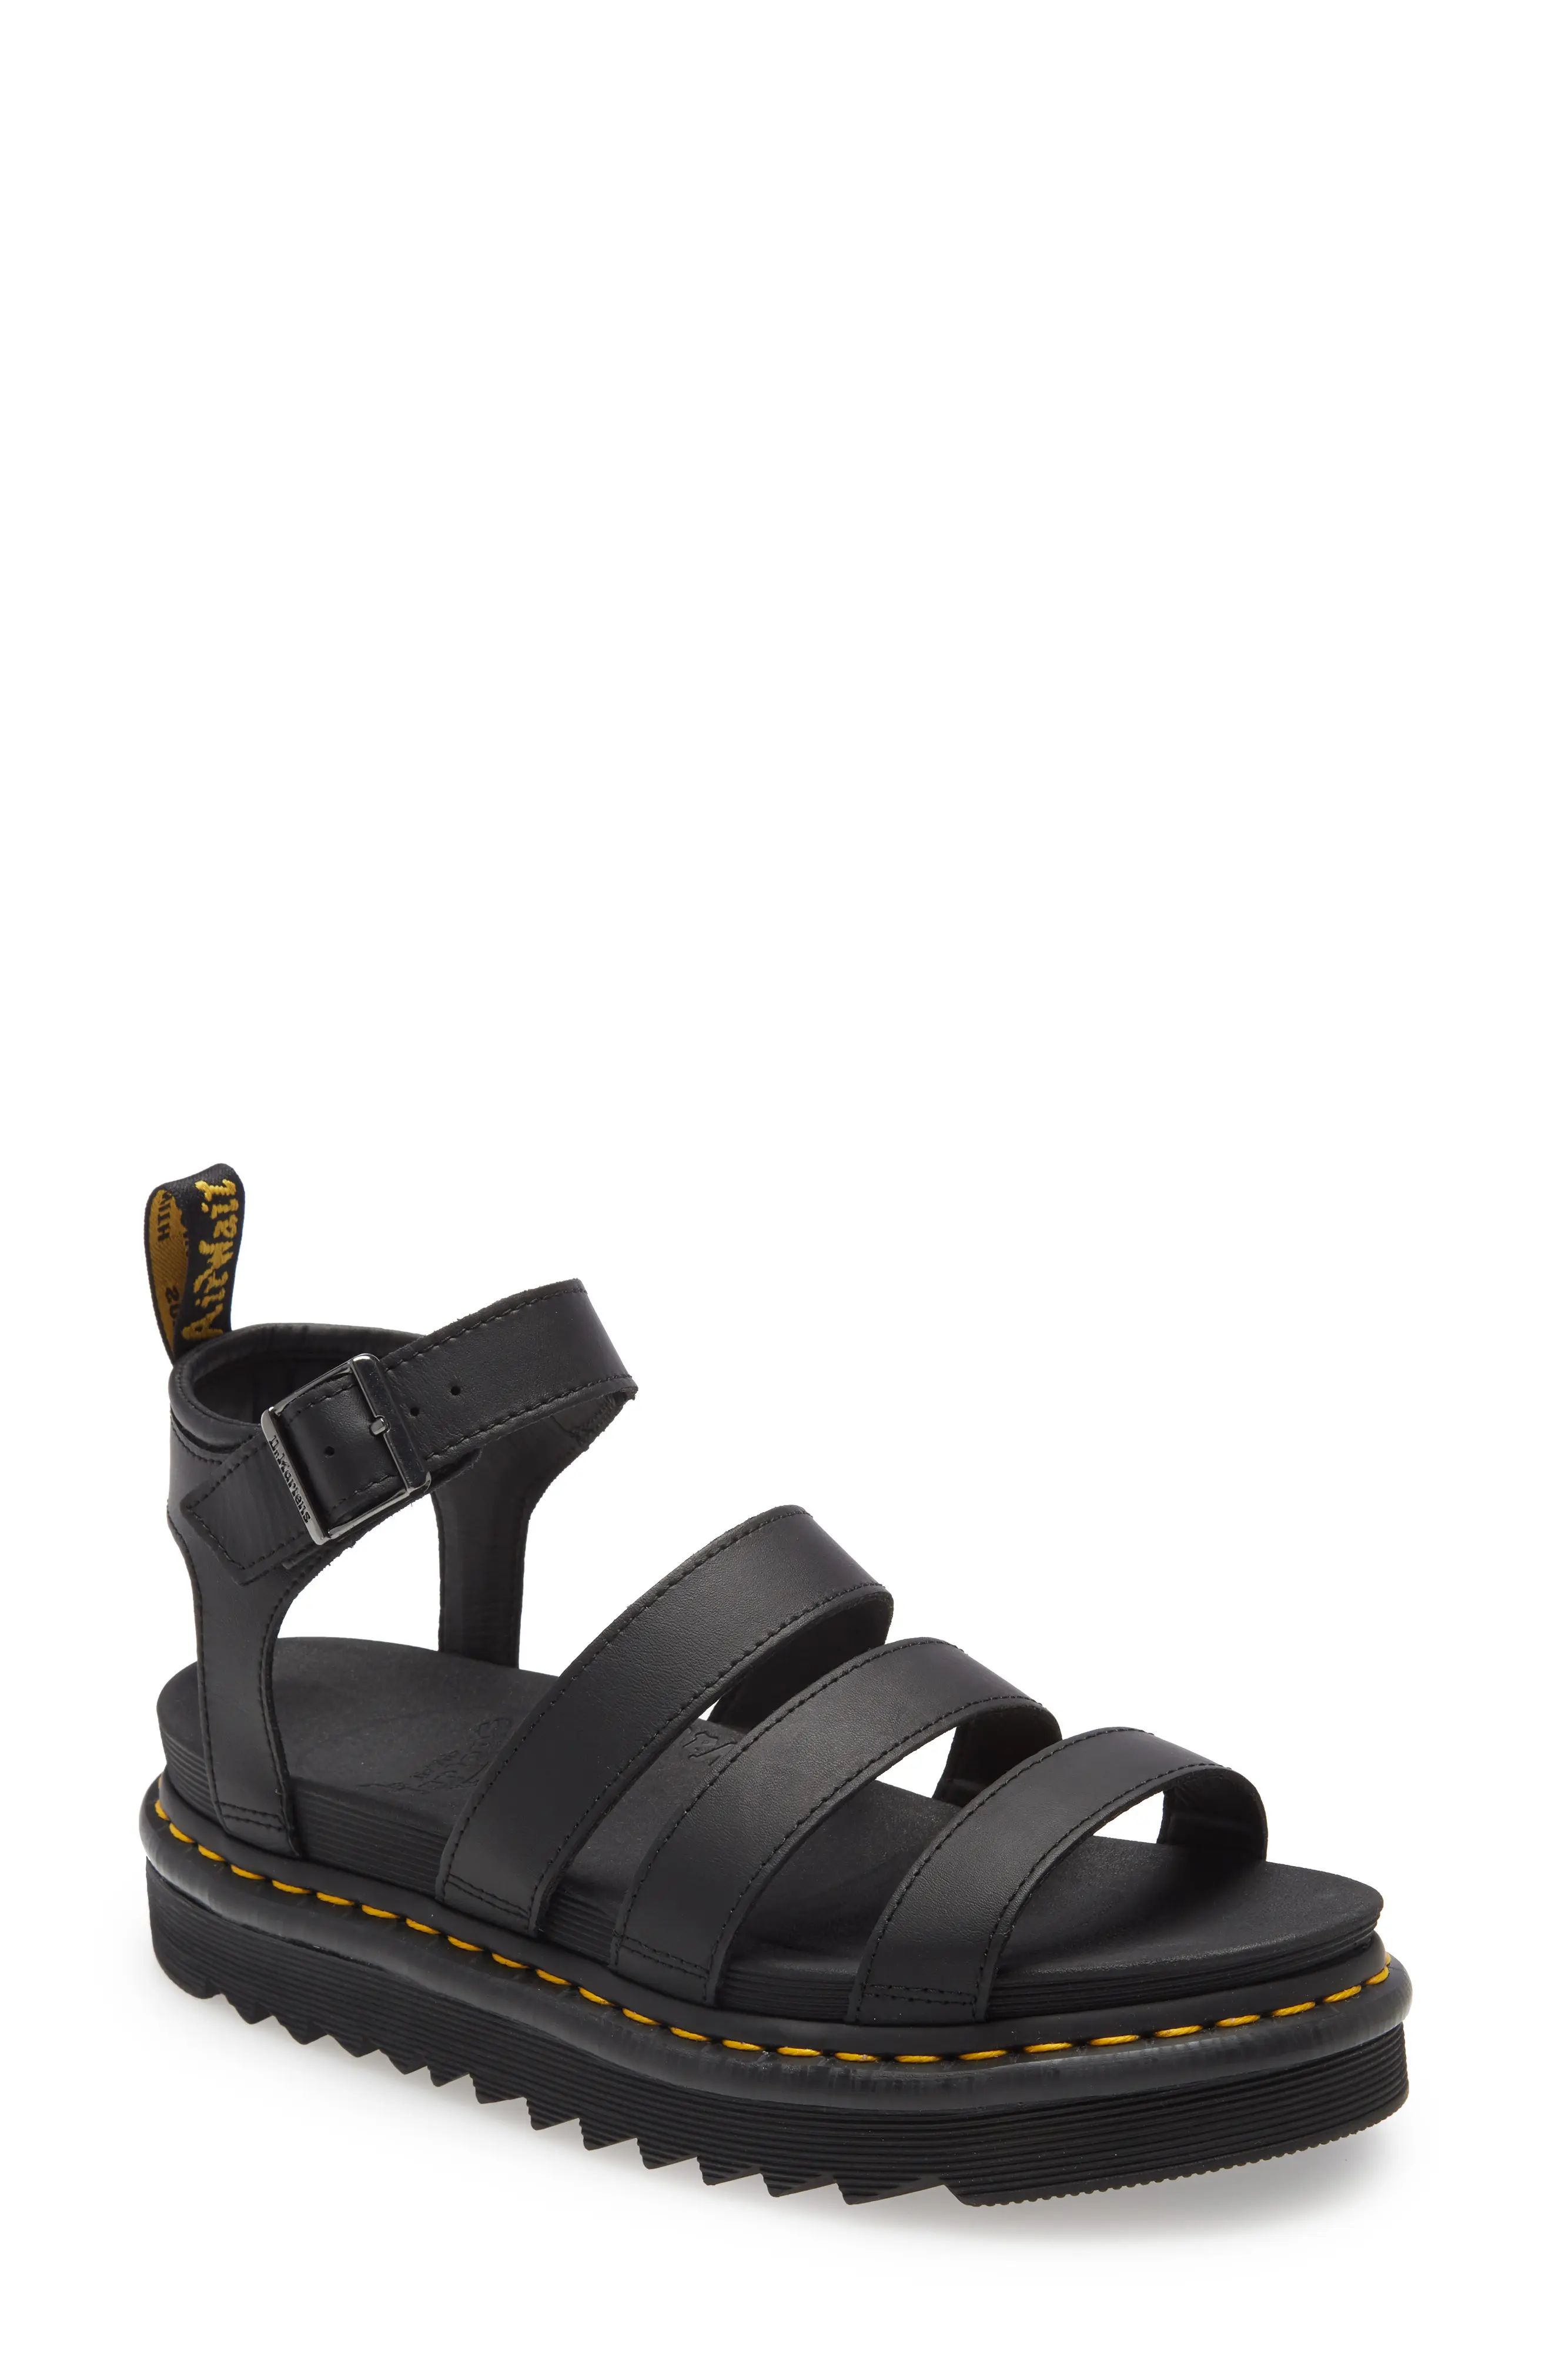 Dr. Martens Blaire Sandal in Black Hydro Leather at Nordstrom, Size 5Us | Nordstrom